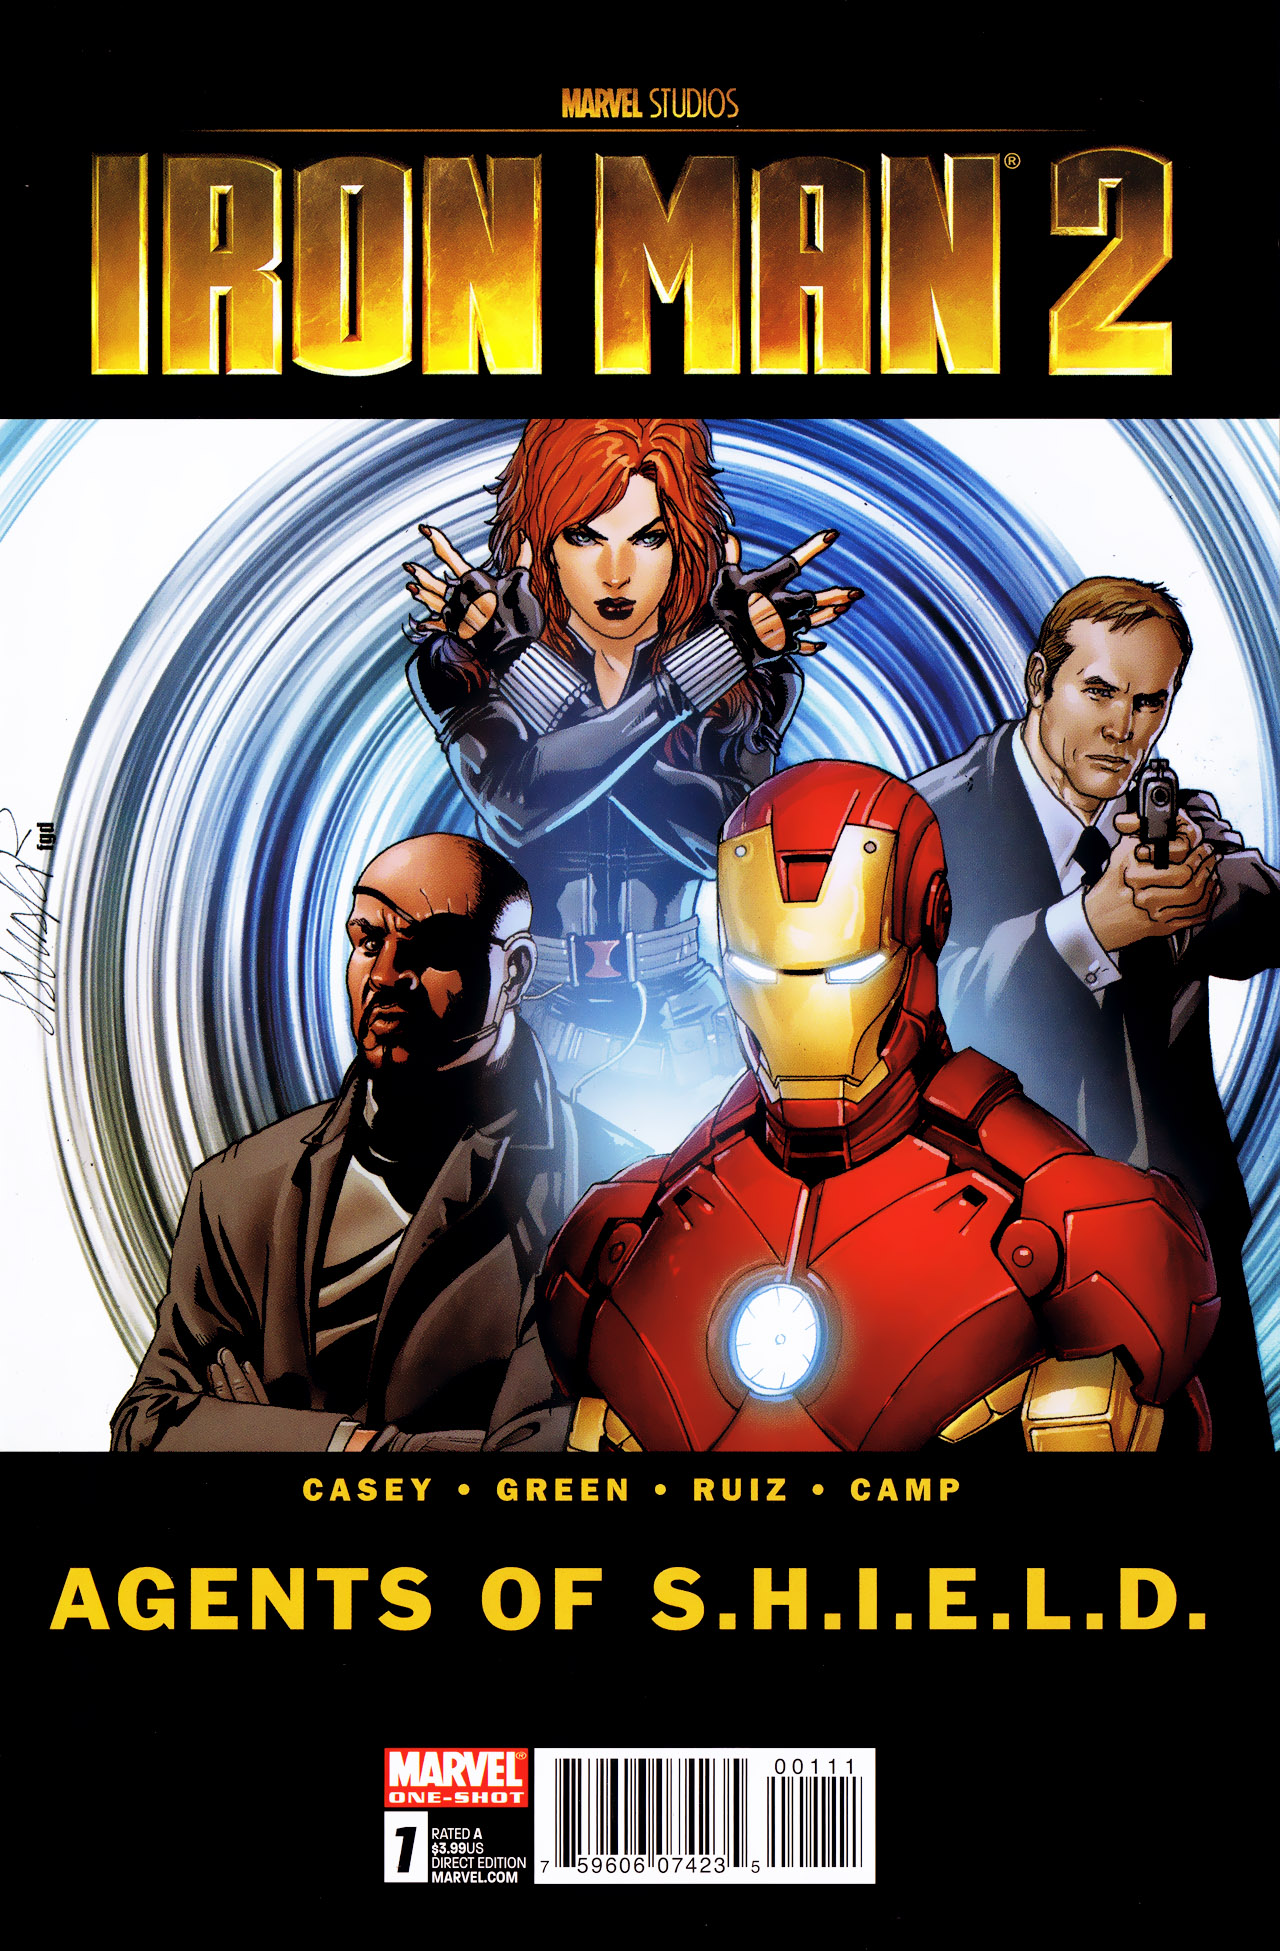 Read online Iron Man 2: Agents of S.H.I.E.L.D. comic -  Issue # Full - 1